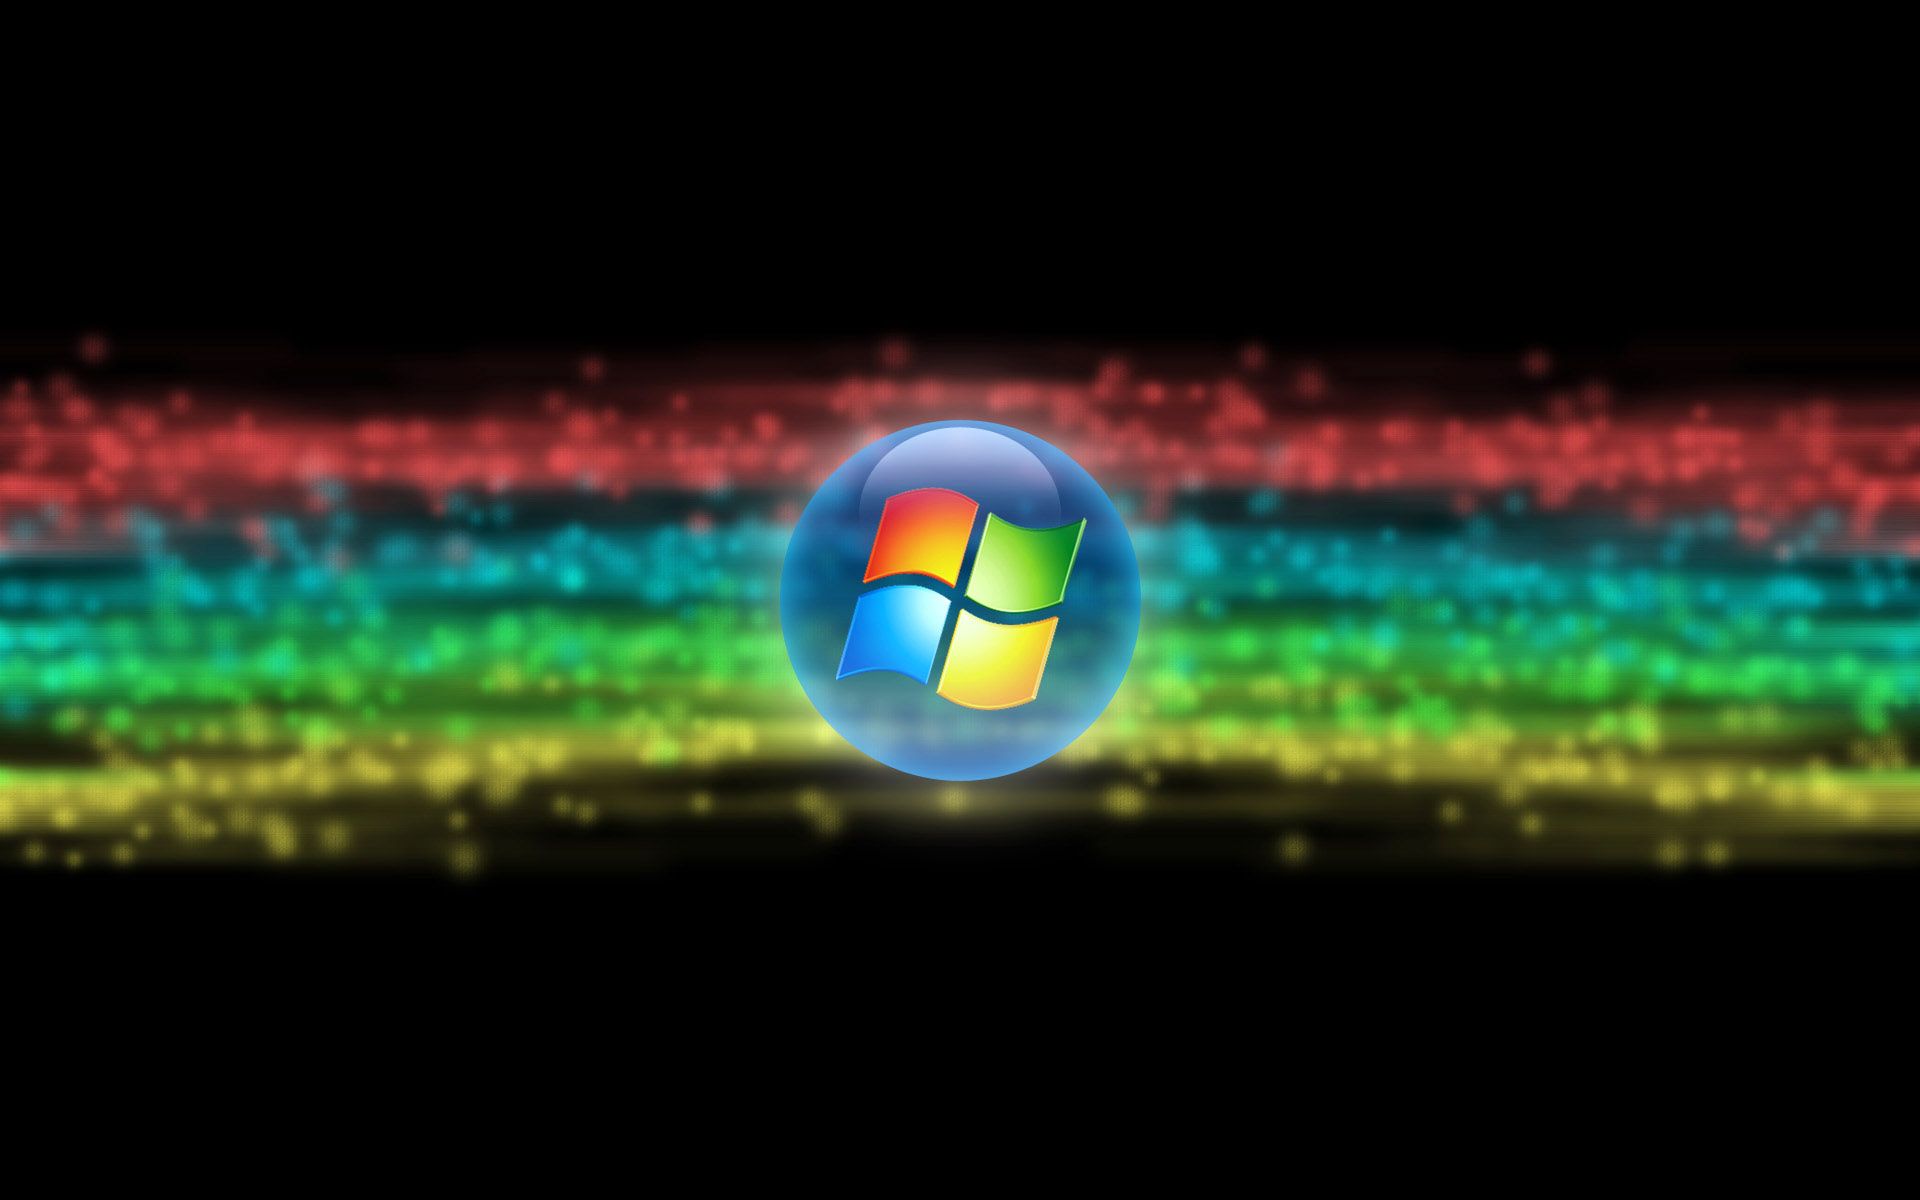 High Resolution Cool Windows 7 Wallpaper Themes 8 HD Full Size